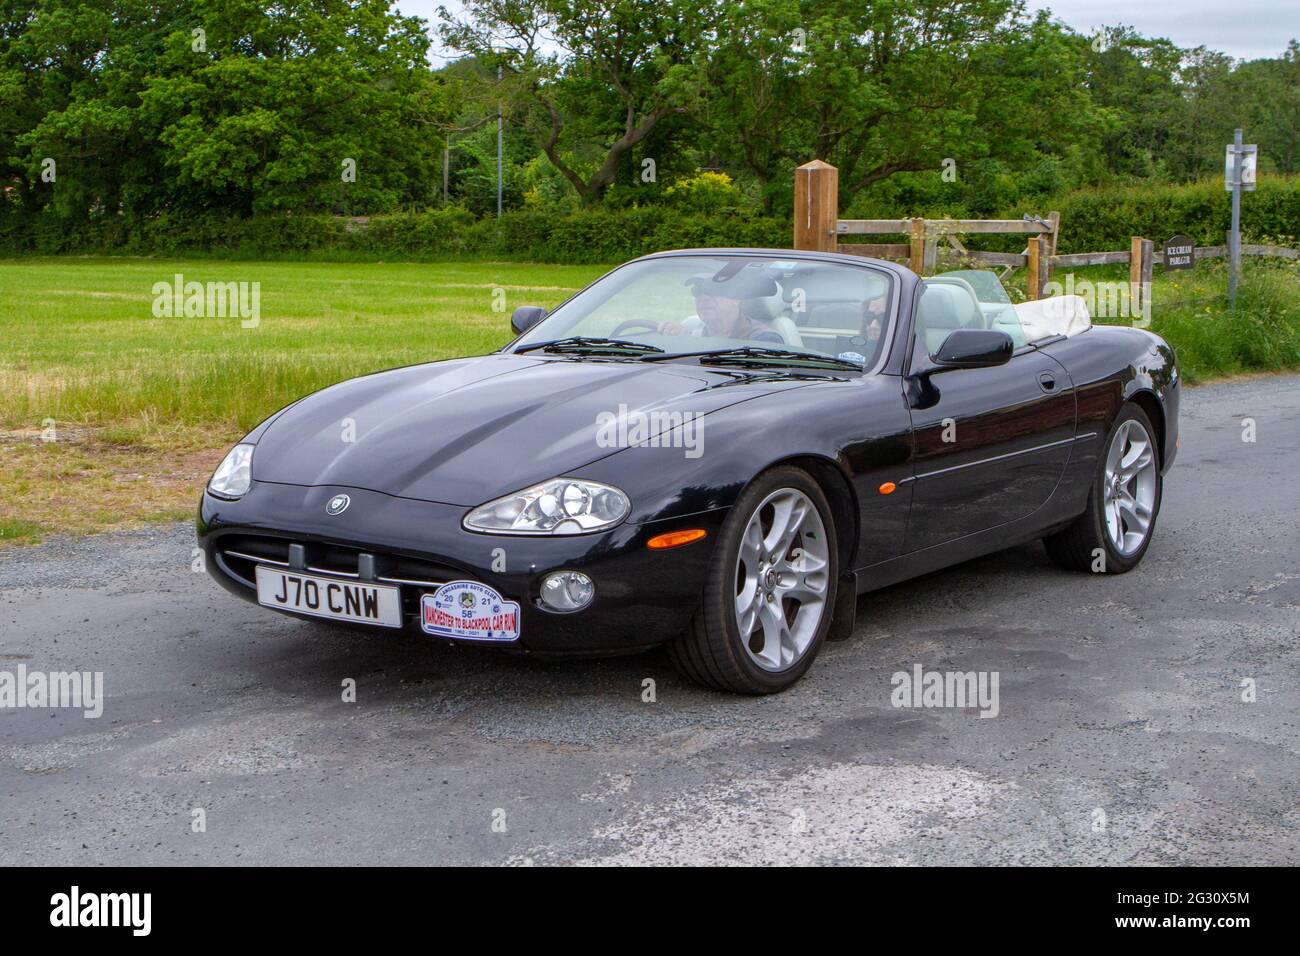 2002 Jaguar XK8 black cabrio, at the 58th Annual Manchester to Blackpool Vintage & Classic Car Run The event is a ‘Touring Assembly' Stock Photo